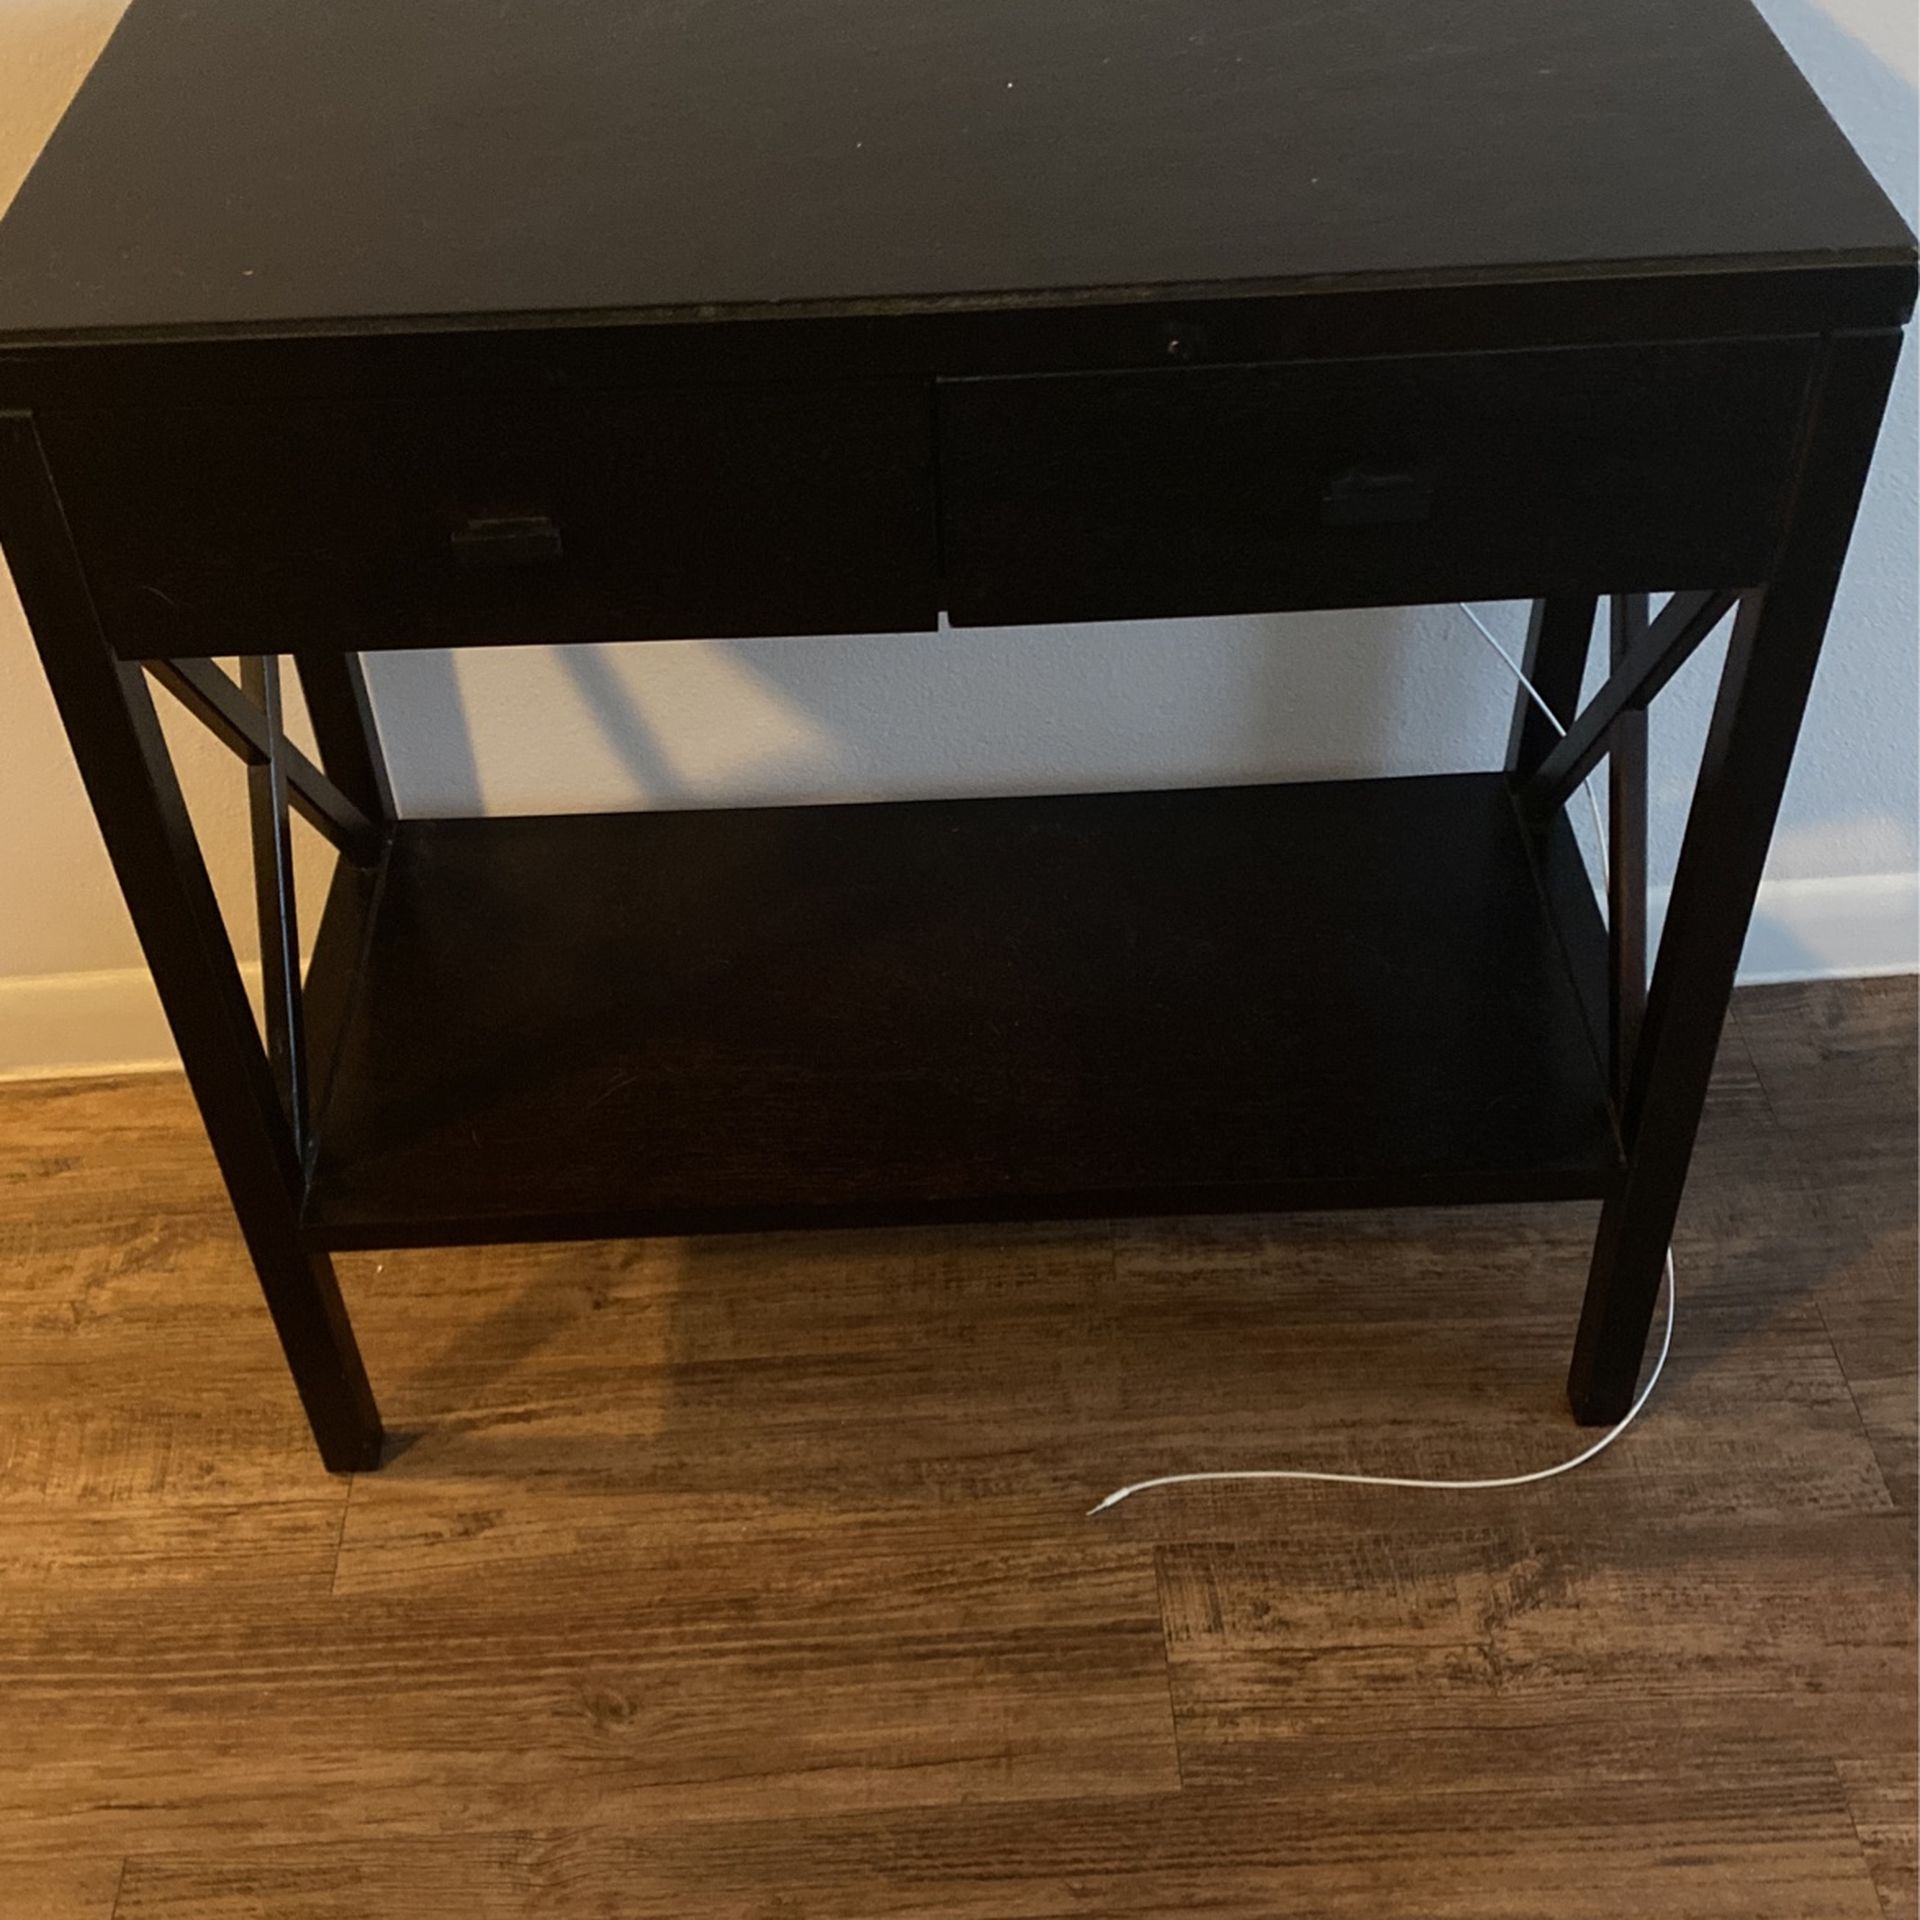 Credenza Table With 2 Front Drawers  Great Condition And Espresso In Color 